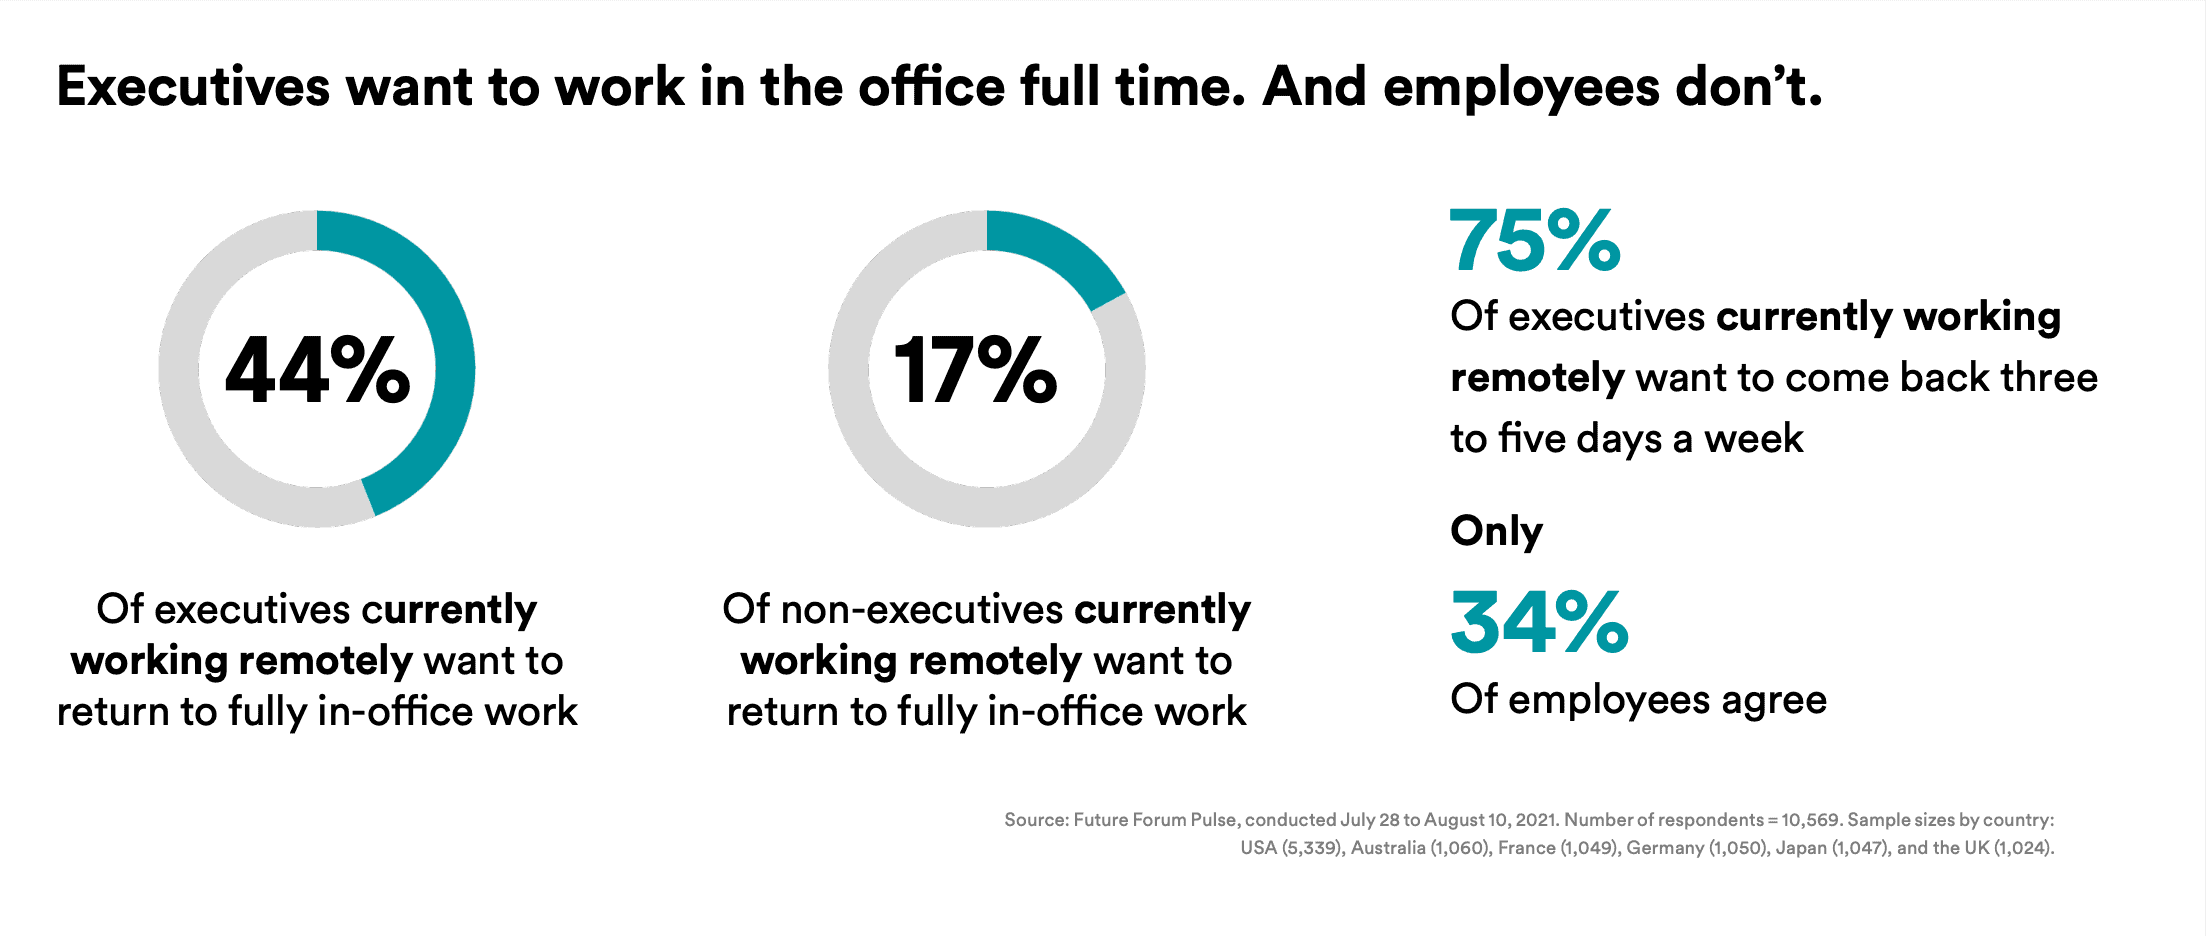 Executives want to work in the office full time. And employees don’t.